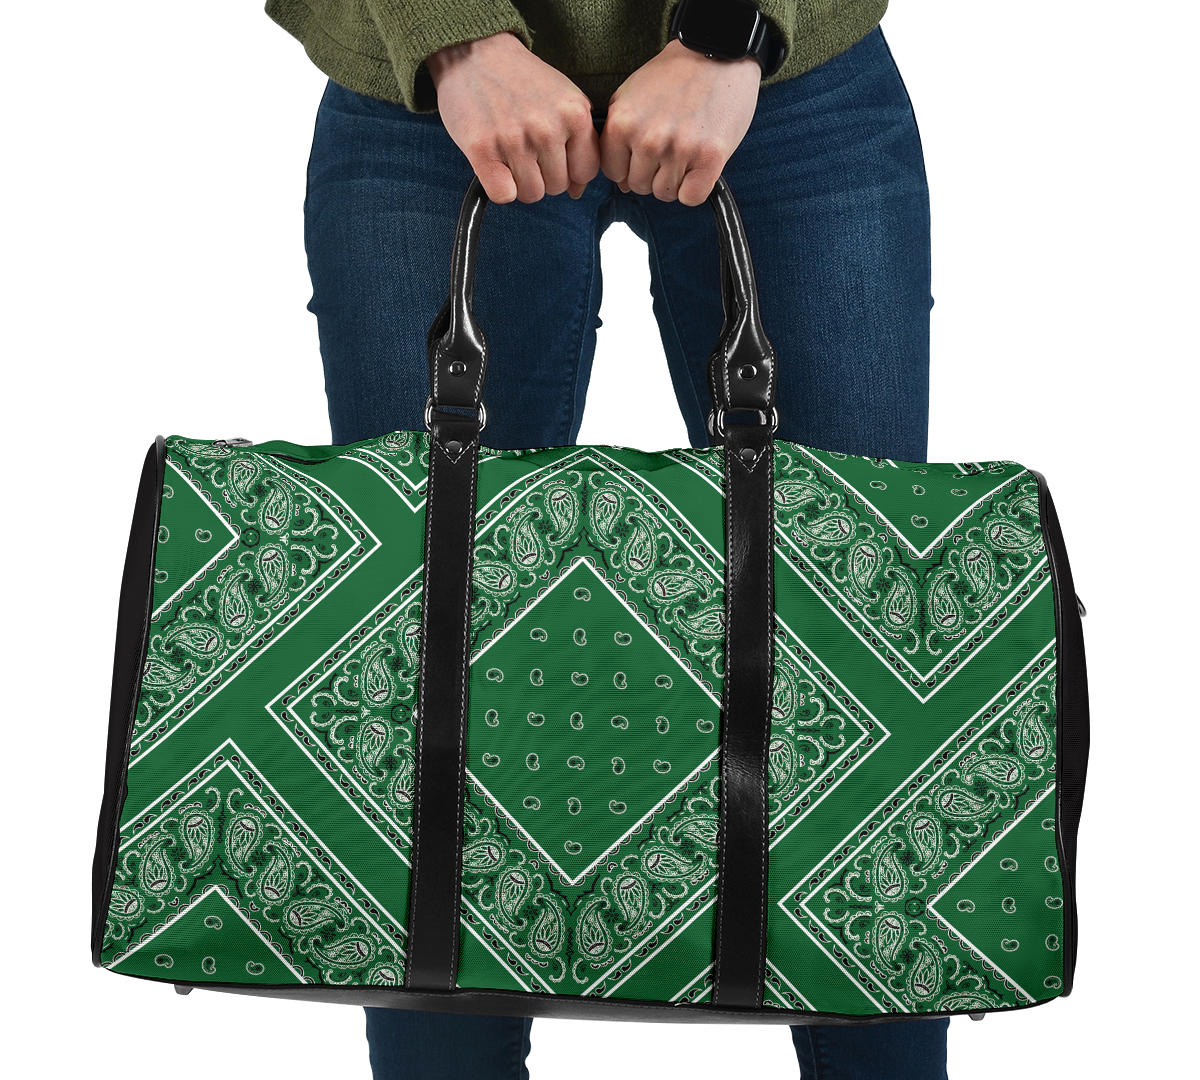 Exclusive Classic Green Bandana Style Travel Bag – This is iT Original